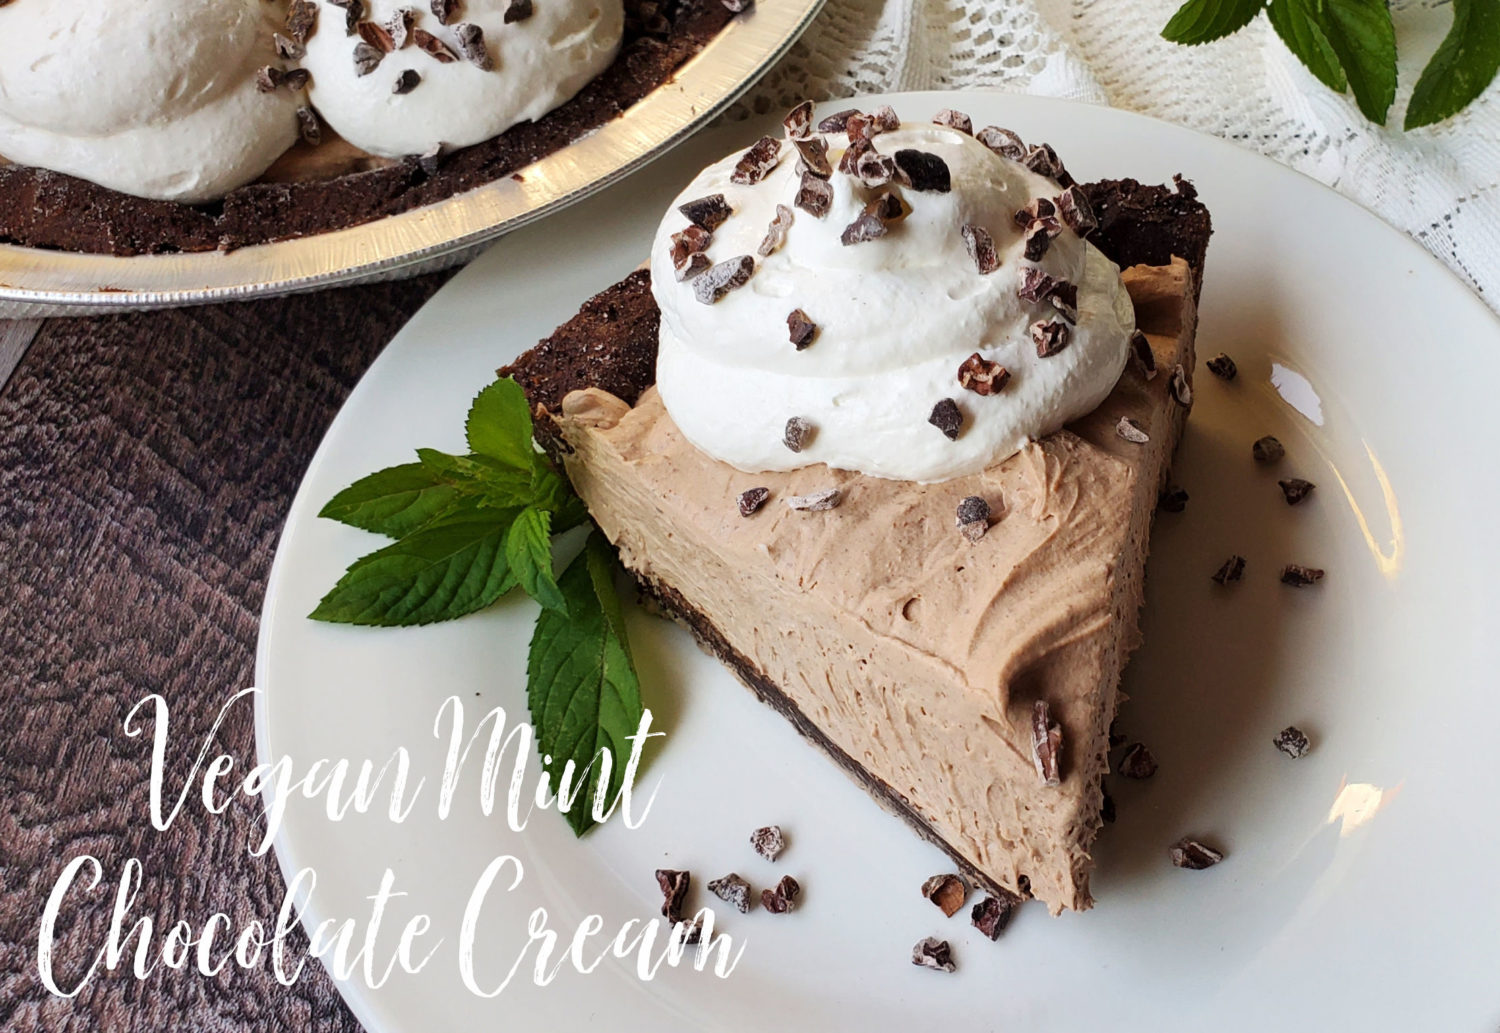 Vegan Mint Chocolate Cream Pie is a heavenly silky lightly sweetened creamy mint filling that tastes like anything but vegan.